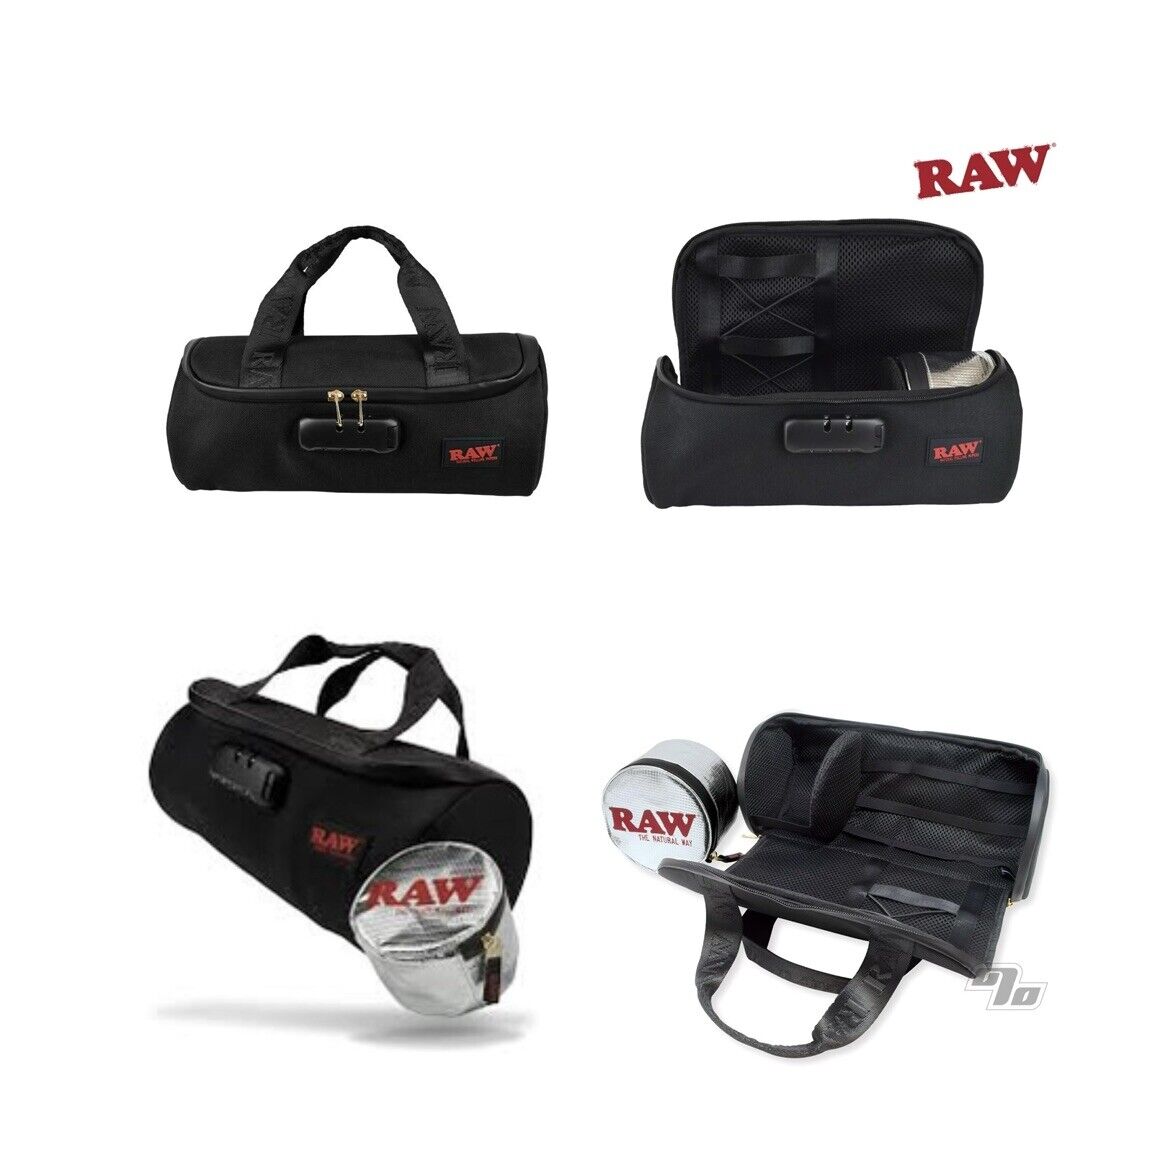 Raw Mini Duffel bag child lock smell water proof LIMITED EDITION